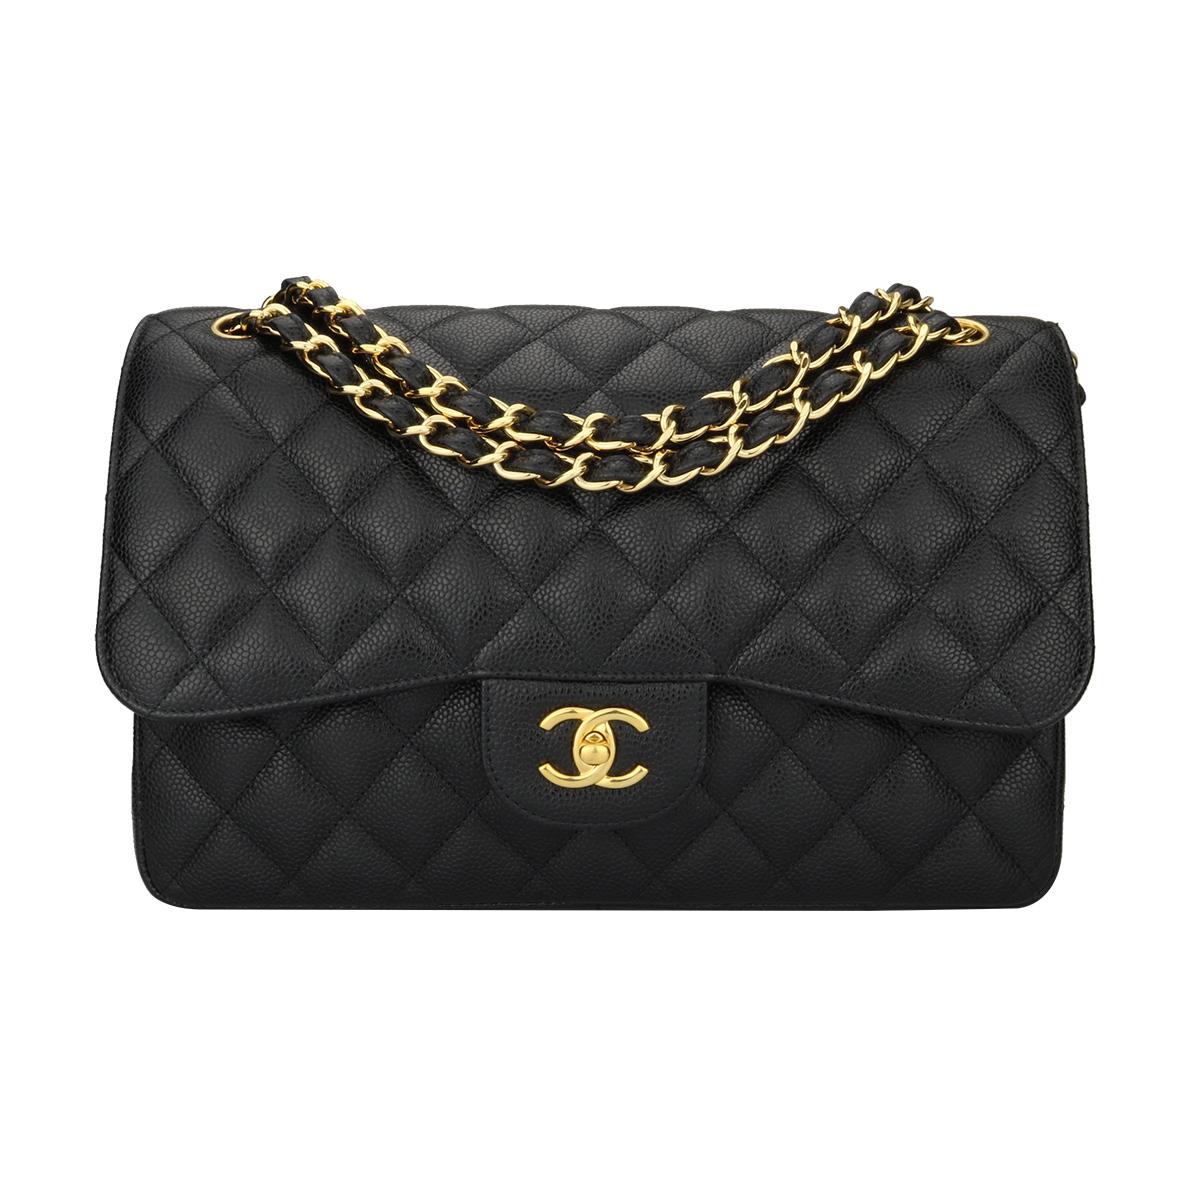 Authentic CHANEL Classic Jumbo Double Flap Black Caviar with Gold Hardware 2015.

This stunning bag is in an excellent-mint condition, the bag still holds its original shape, and the hardware is still very shiny. Leather still smells fresh as if